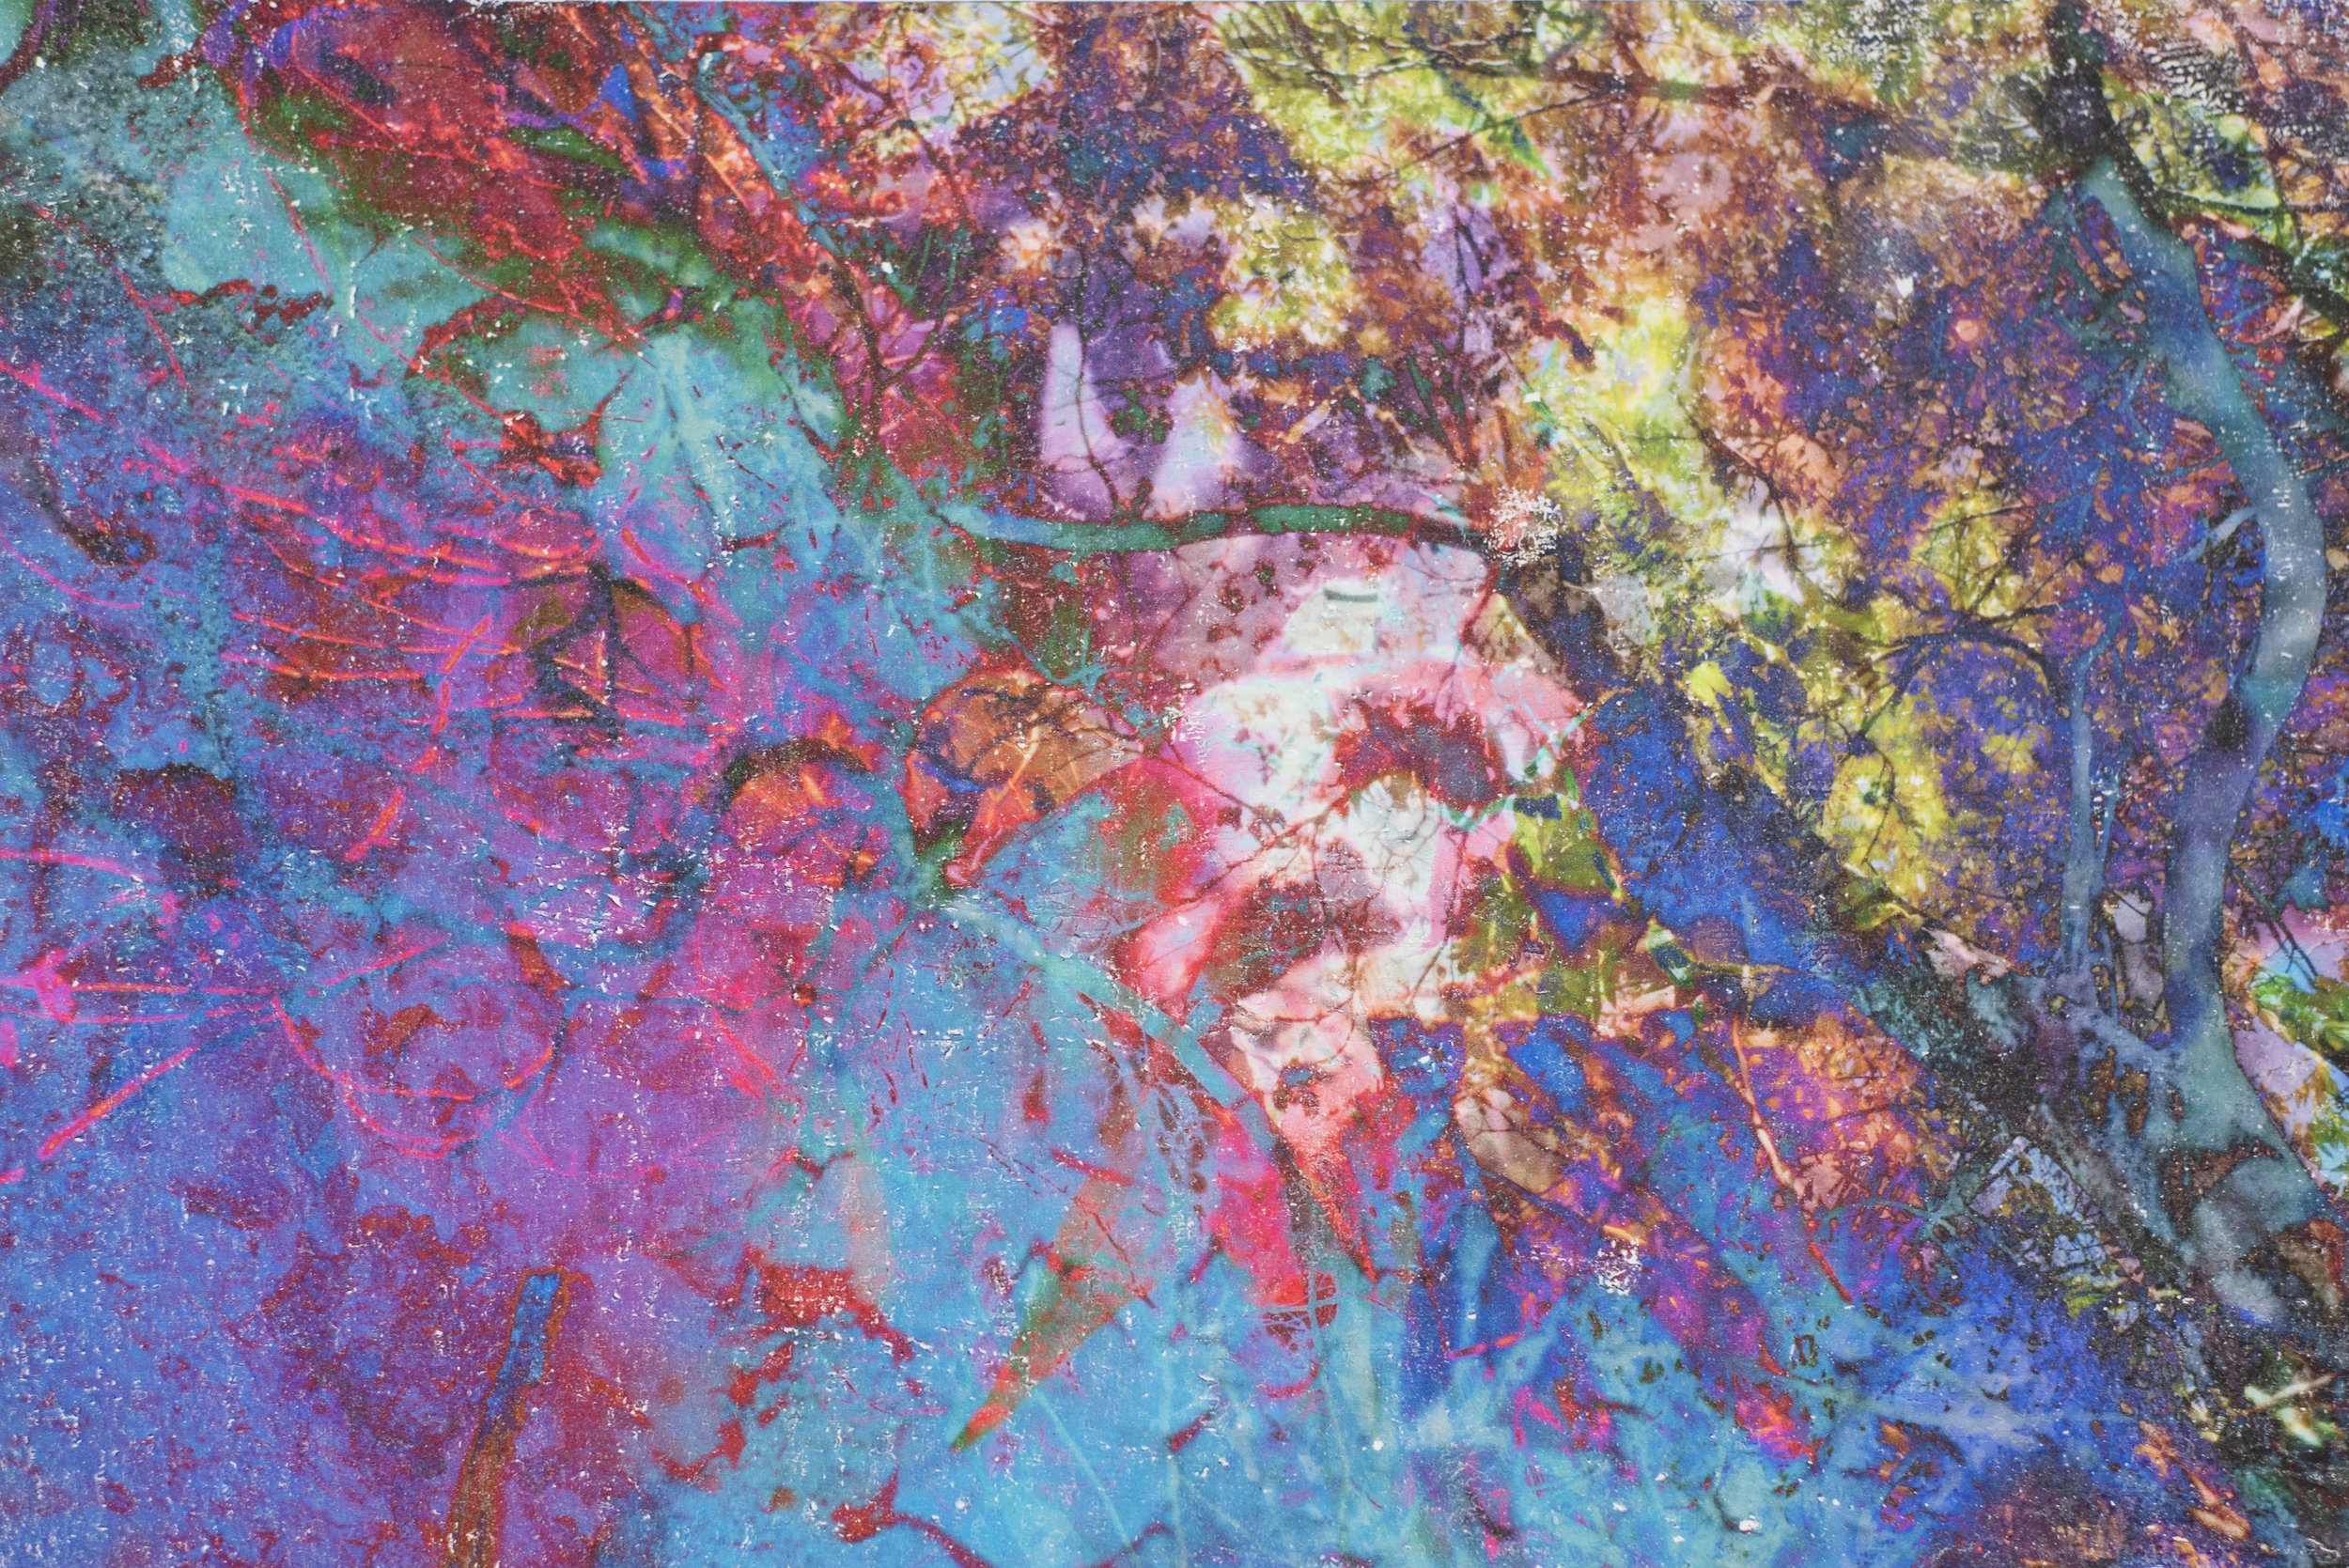  Hyperstimulation Fracture 0656, 2019 8x10”  Archival Pigment Photo Transfer on Watercolor Paper 